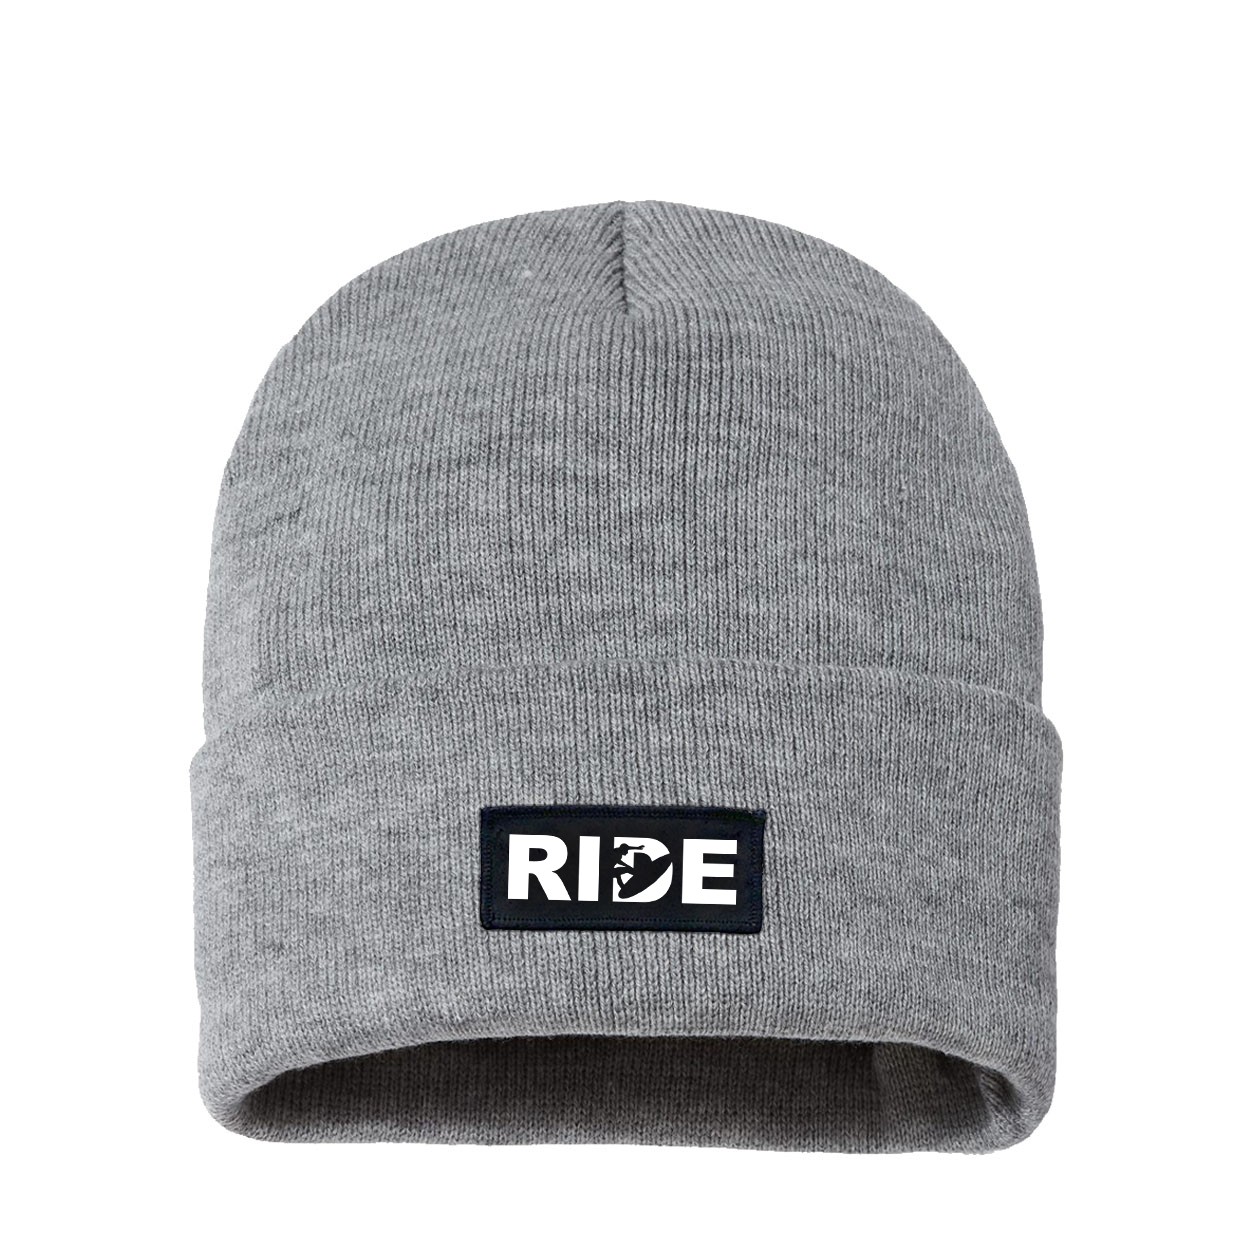 Ride Surf Logo Night Out Woven Patch Night Out Sherpa Lined Cuffed Beanie Heather Gray (White Logo)